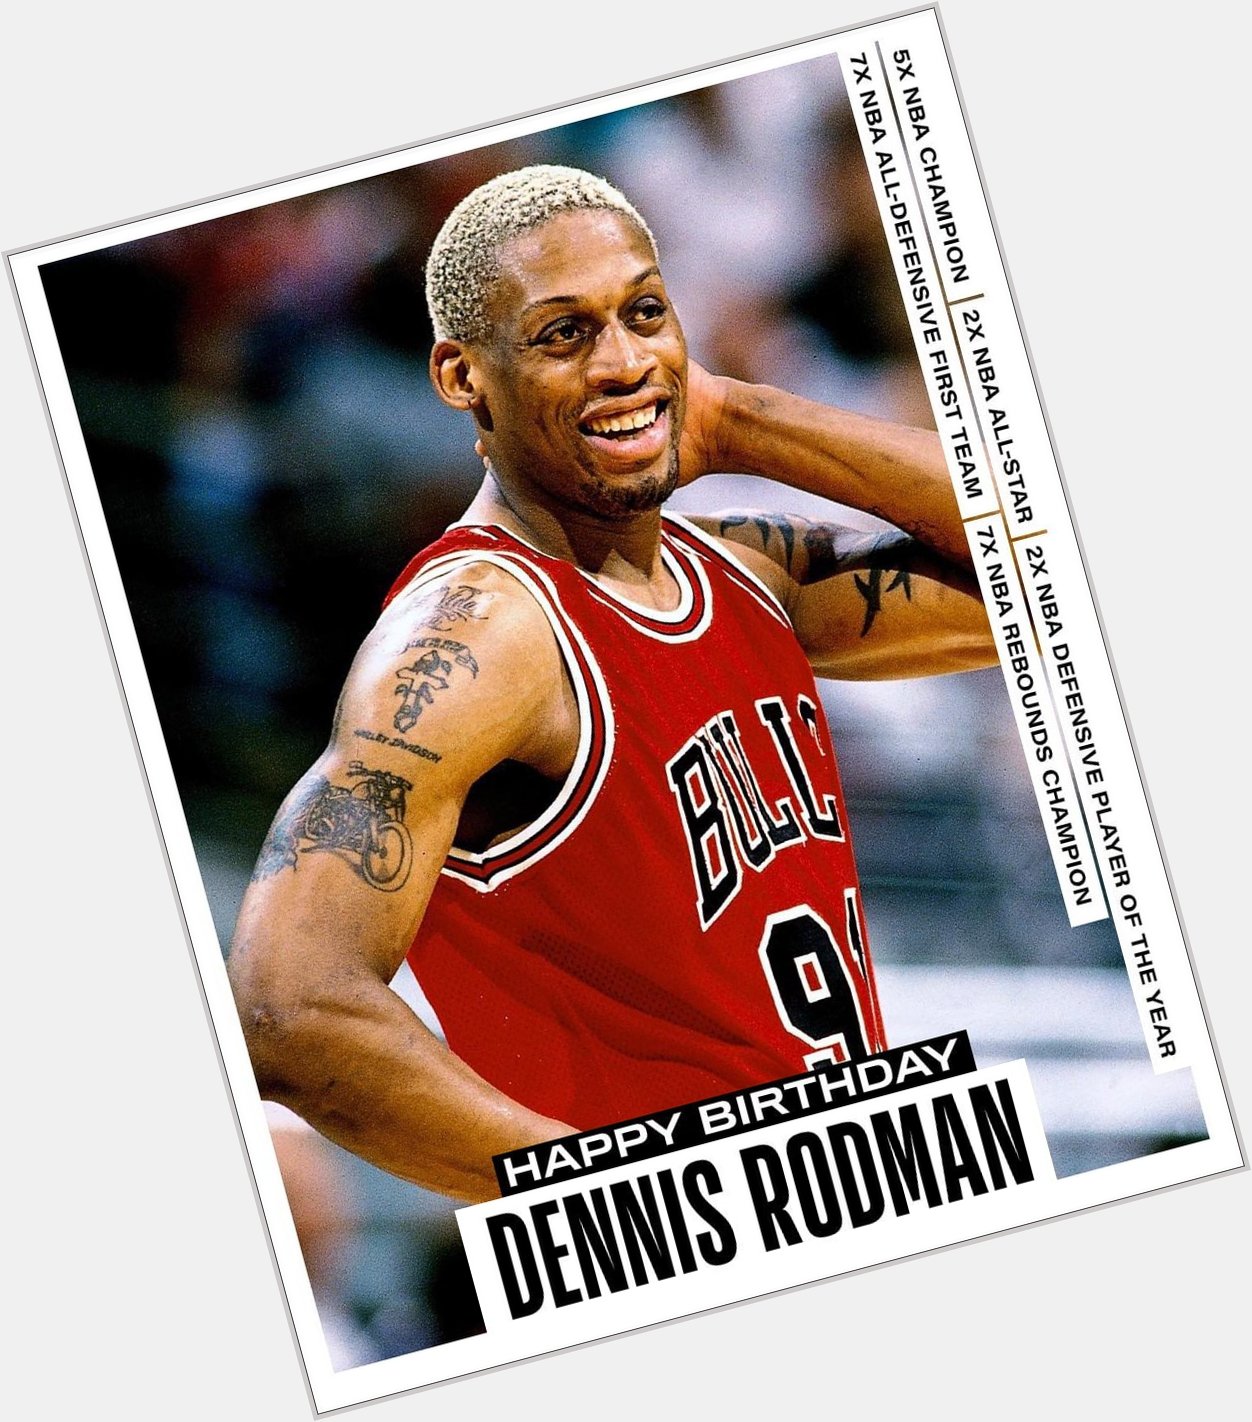 Dennis Rodman is 60 . Happy birthday to one of the baddest players in the game 